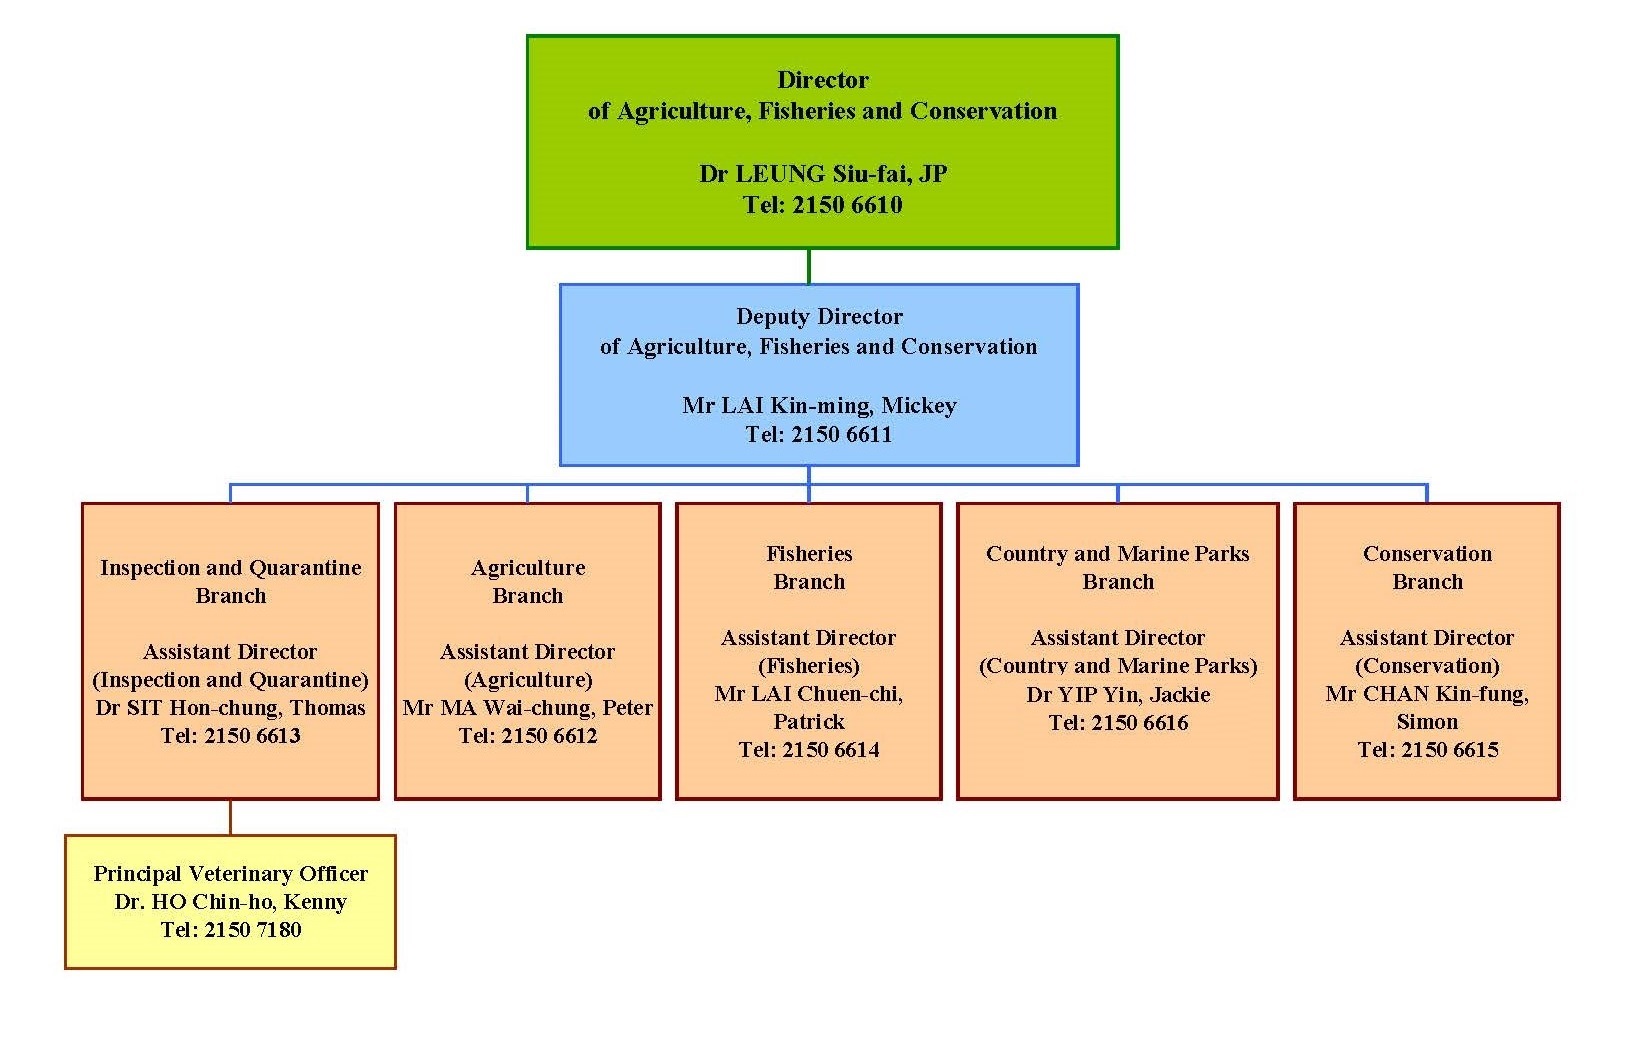 Hong Kong Government Structure Chart